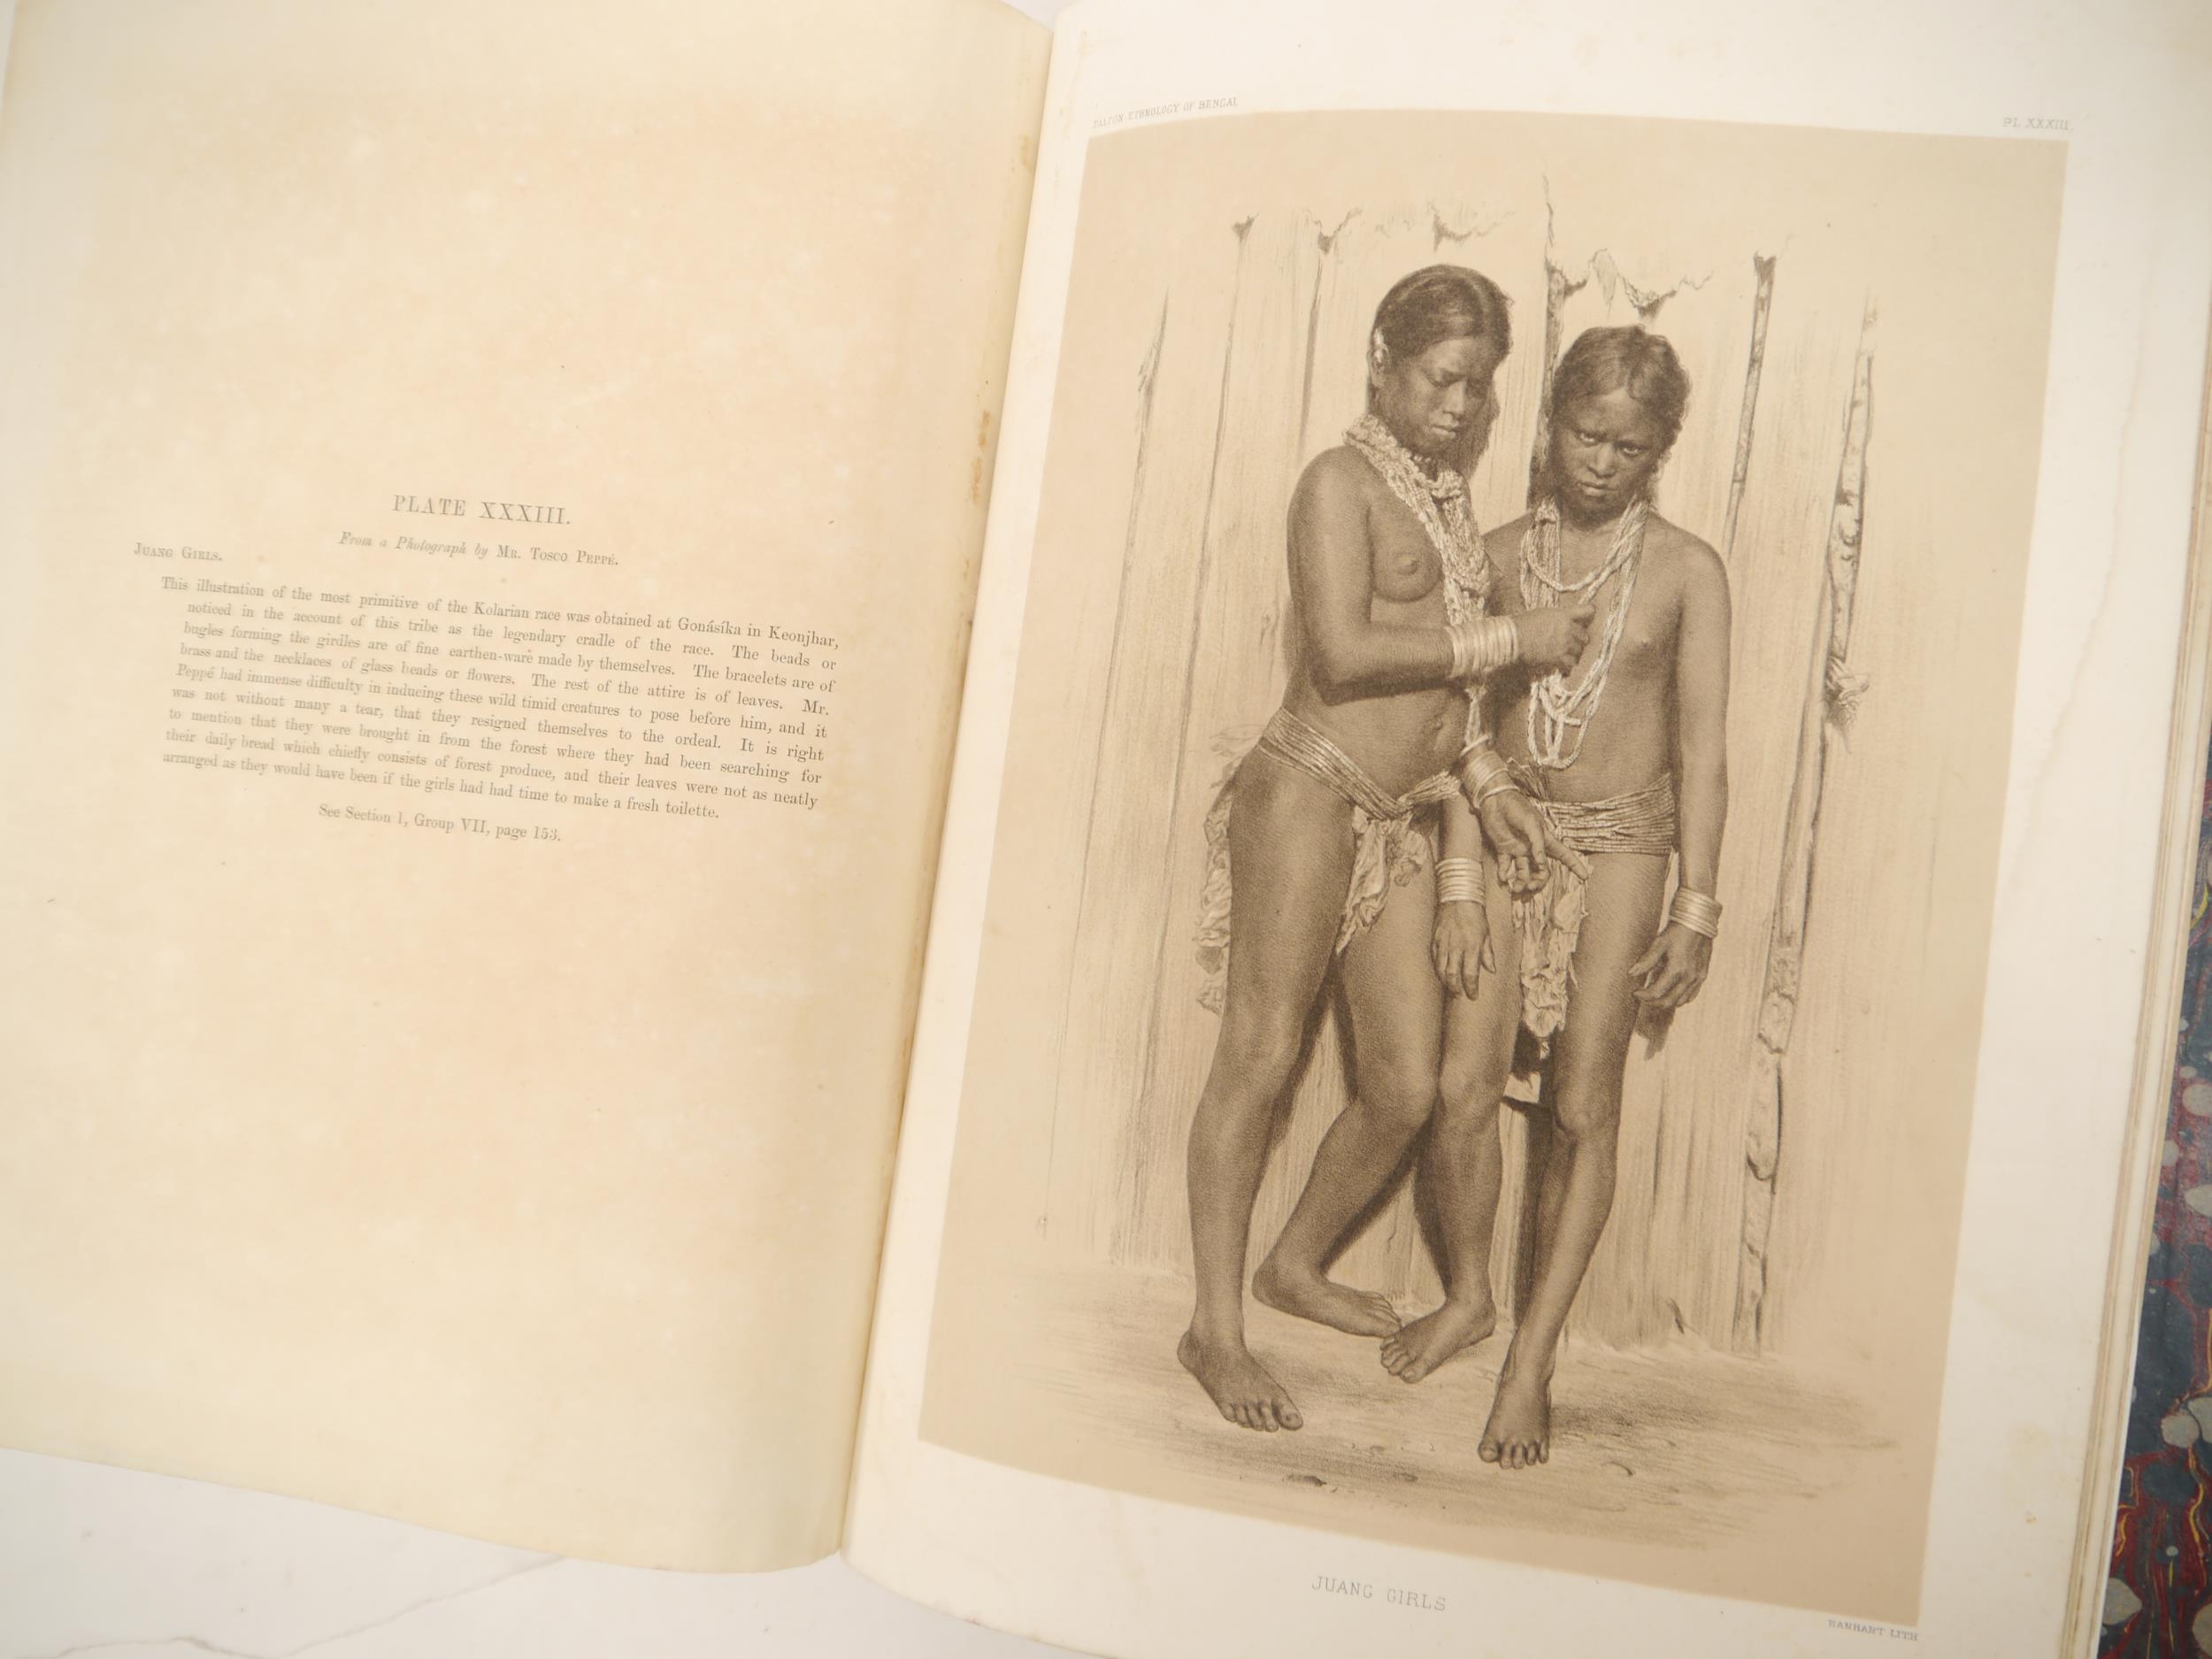 Edward Tuite Dalton: 'Descriptive Ethnology of Bengal', Calcutta, Office of the Superintendent of - Image 24 of 27